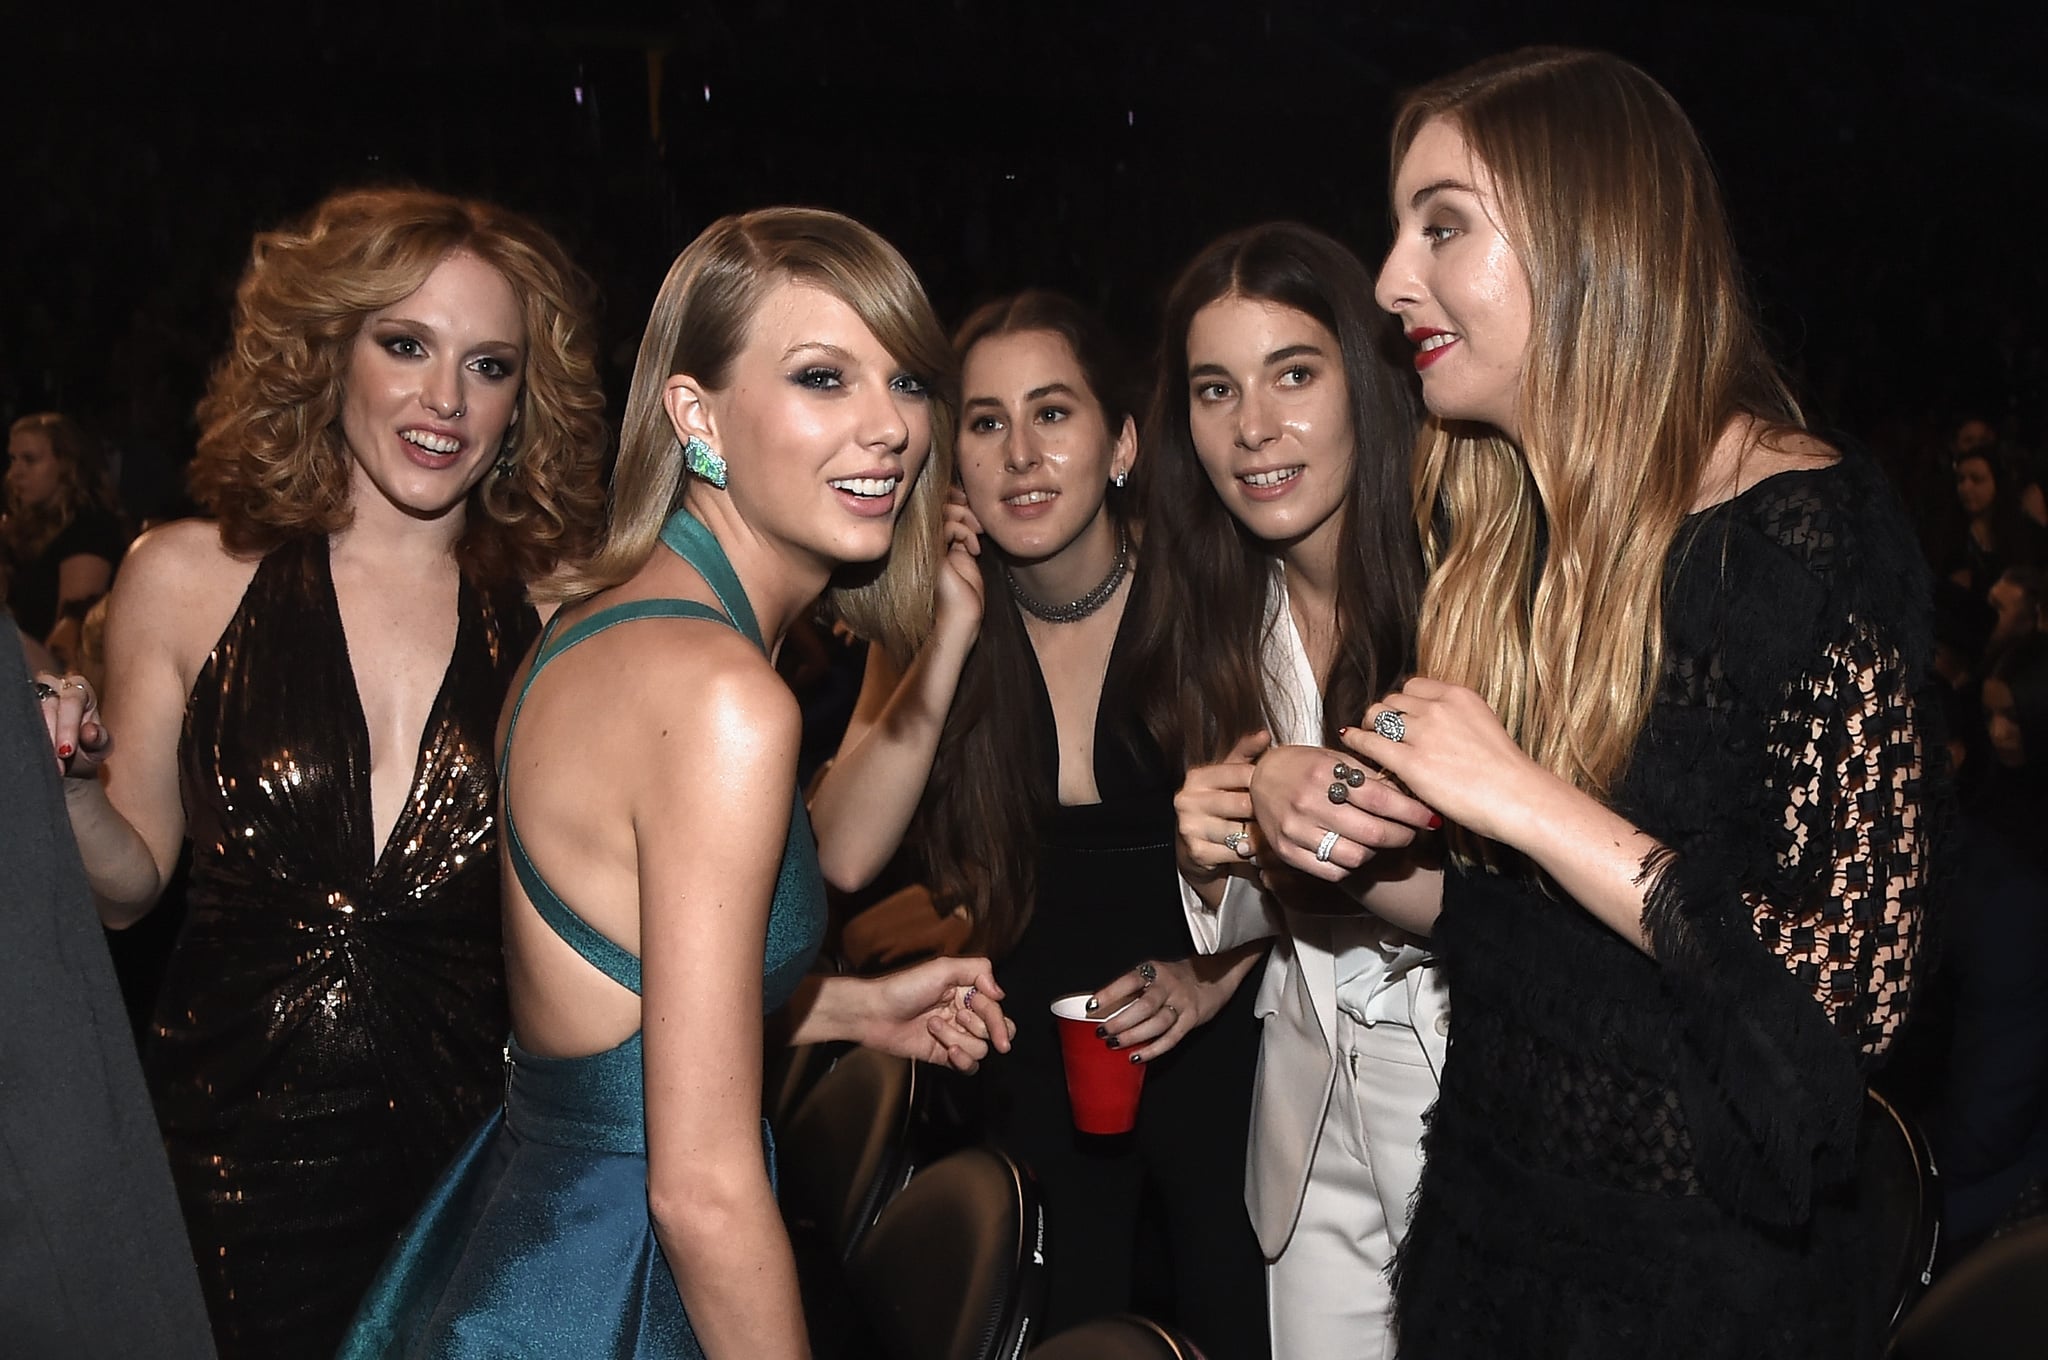 LOS ANGELES, CA - FEBRUARY 08: (L-R) Abigail Anderson and recording artists Taylor Swift, Alana Haim, Danielle Haim and Este Haim of Haim attend The 57th Annual GRAMMY Awards at the STAPLES Center on February 8, 2015 in Los Angeles, California.  (Photo by Larry Busacca/Getty Images for NARAS)